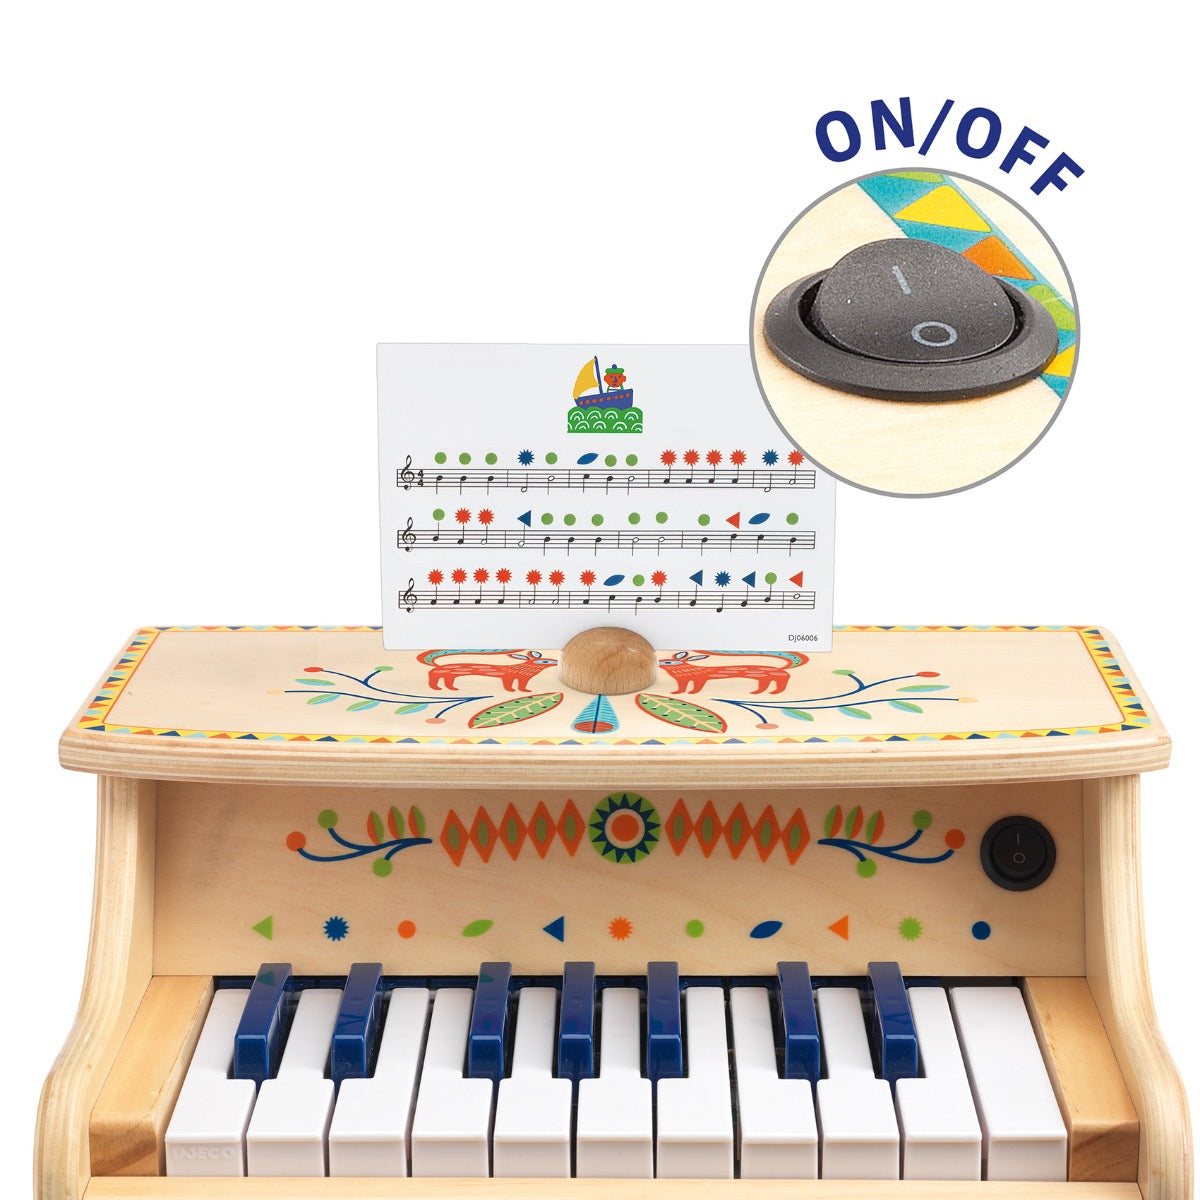 Toy Piano - Animambo Electronic Piano by Djeco